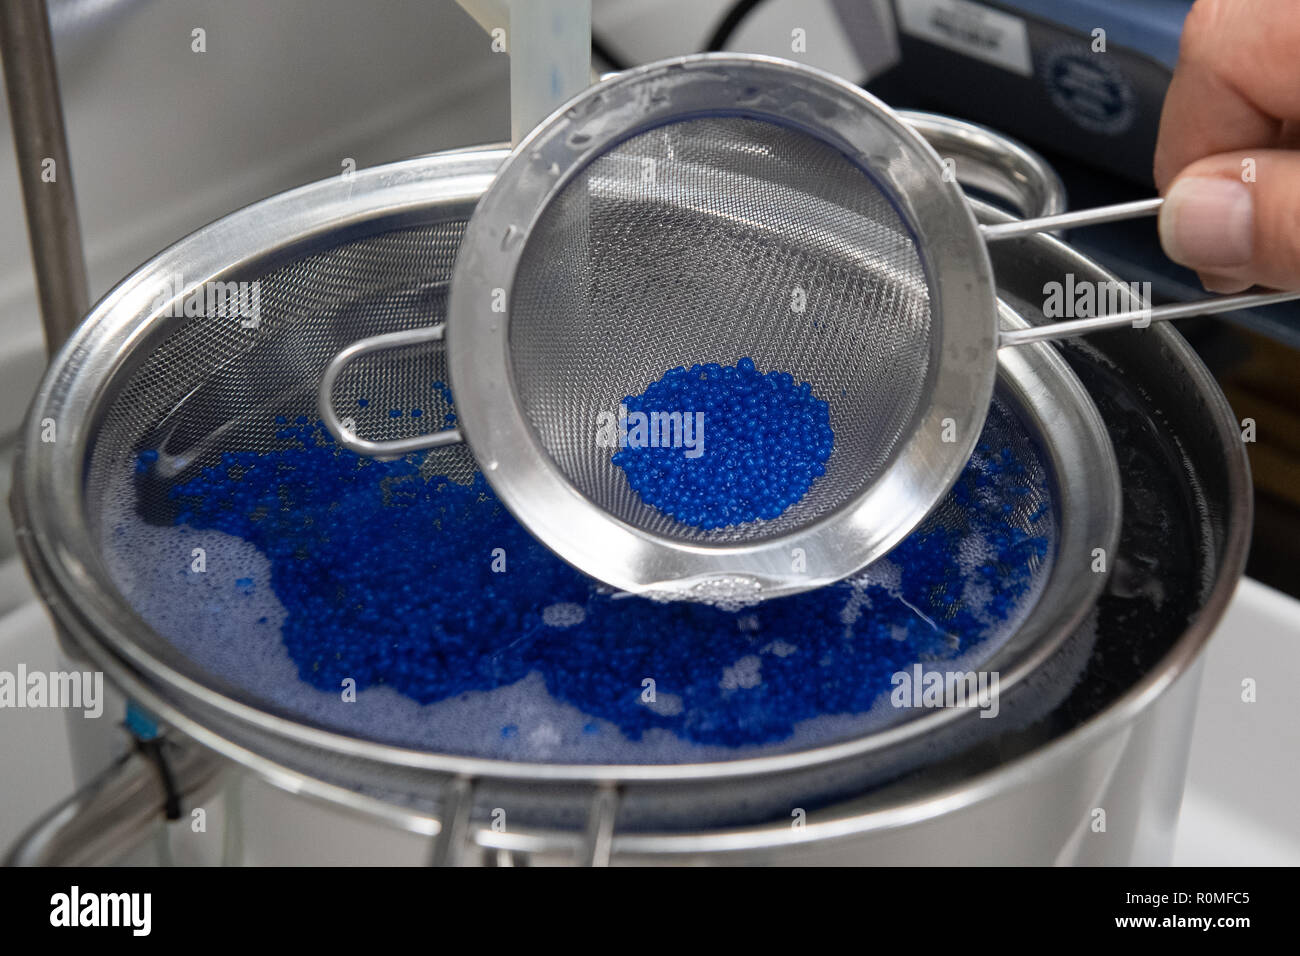 Holzminden, Germany. 23rd Oct, 2018. An employee of Symrise AG holds a sieve with "ActiPearls" at the encapsulation system. Symrise is one of the world's leading suppliers of fragrances and flavors. Credit: Swen Pförtner/dpa/Alamy Live News Stock Photo